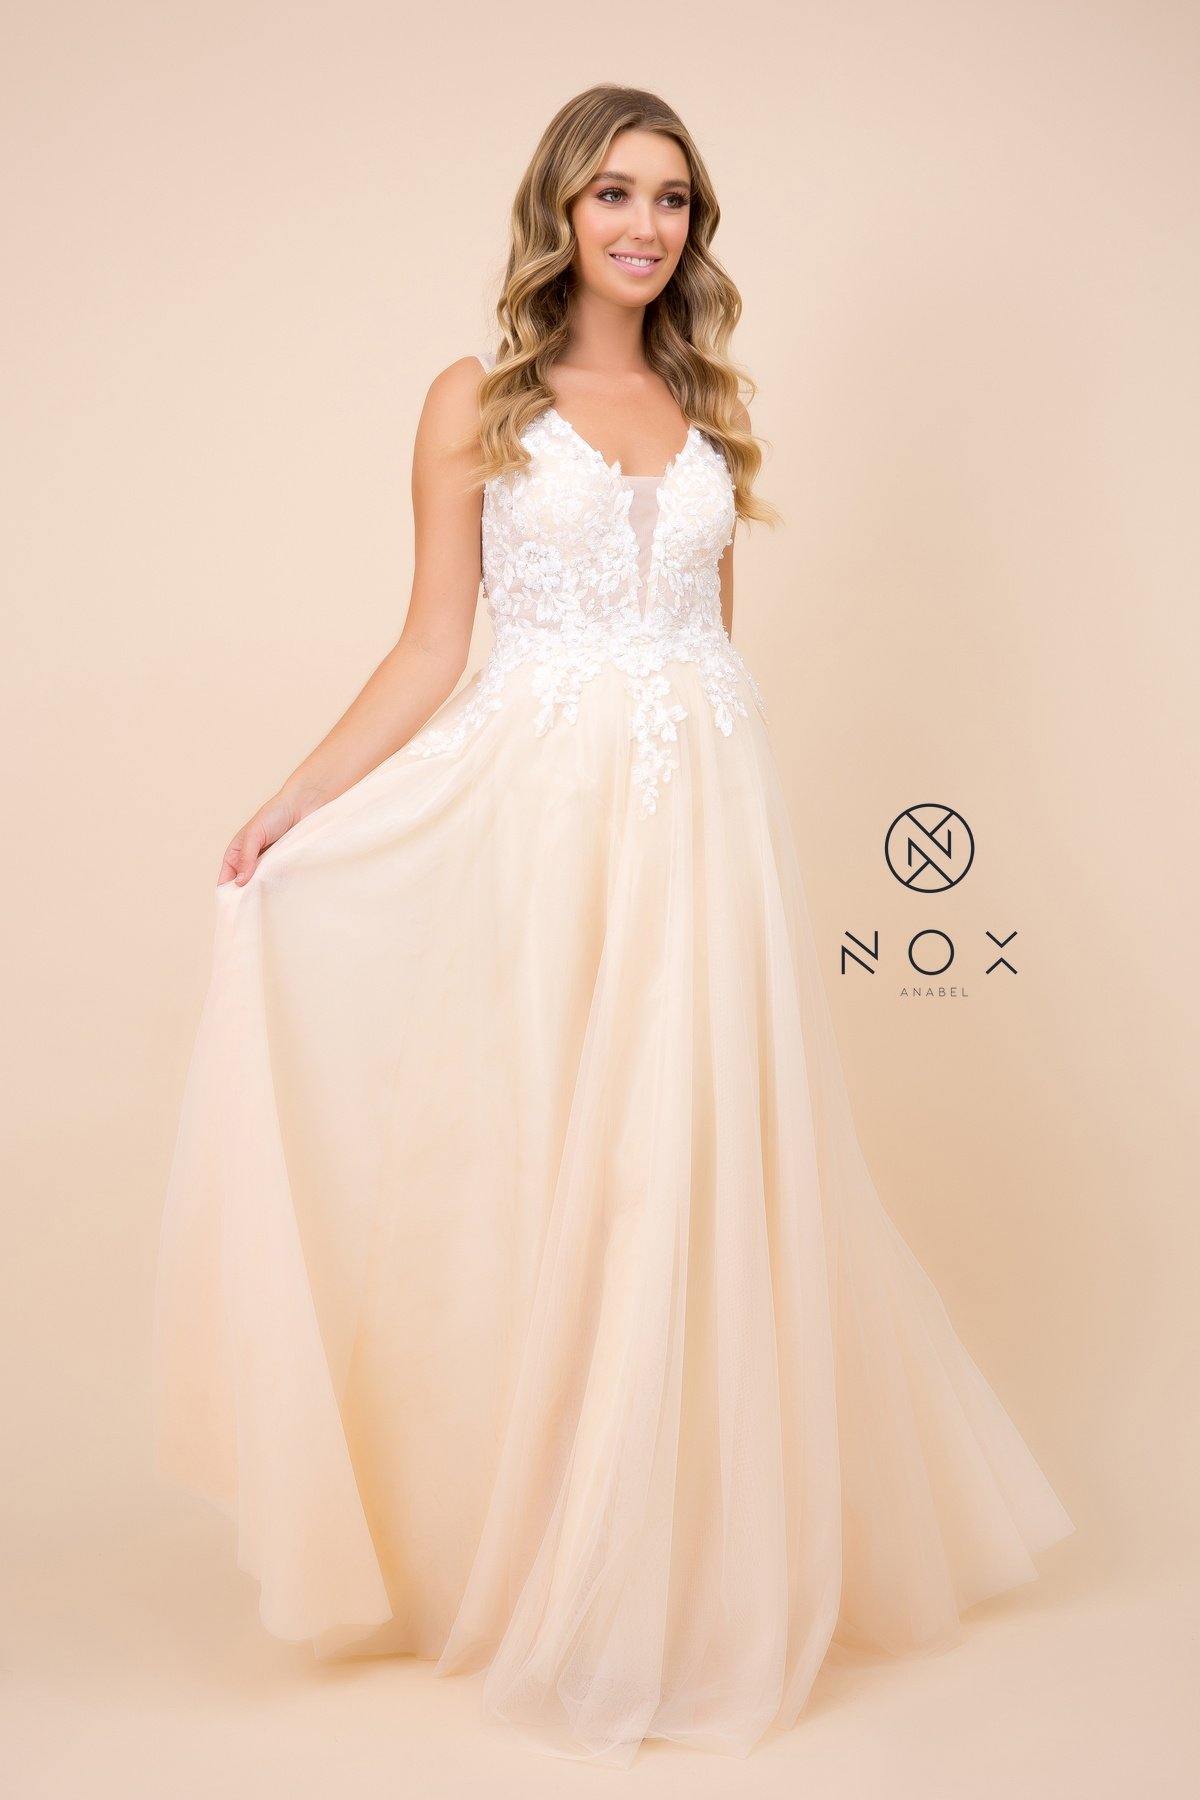 Long Prom Dress Formal Evening Gown - The Dress Outlet Nox Anabel